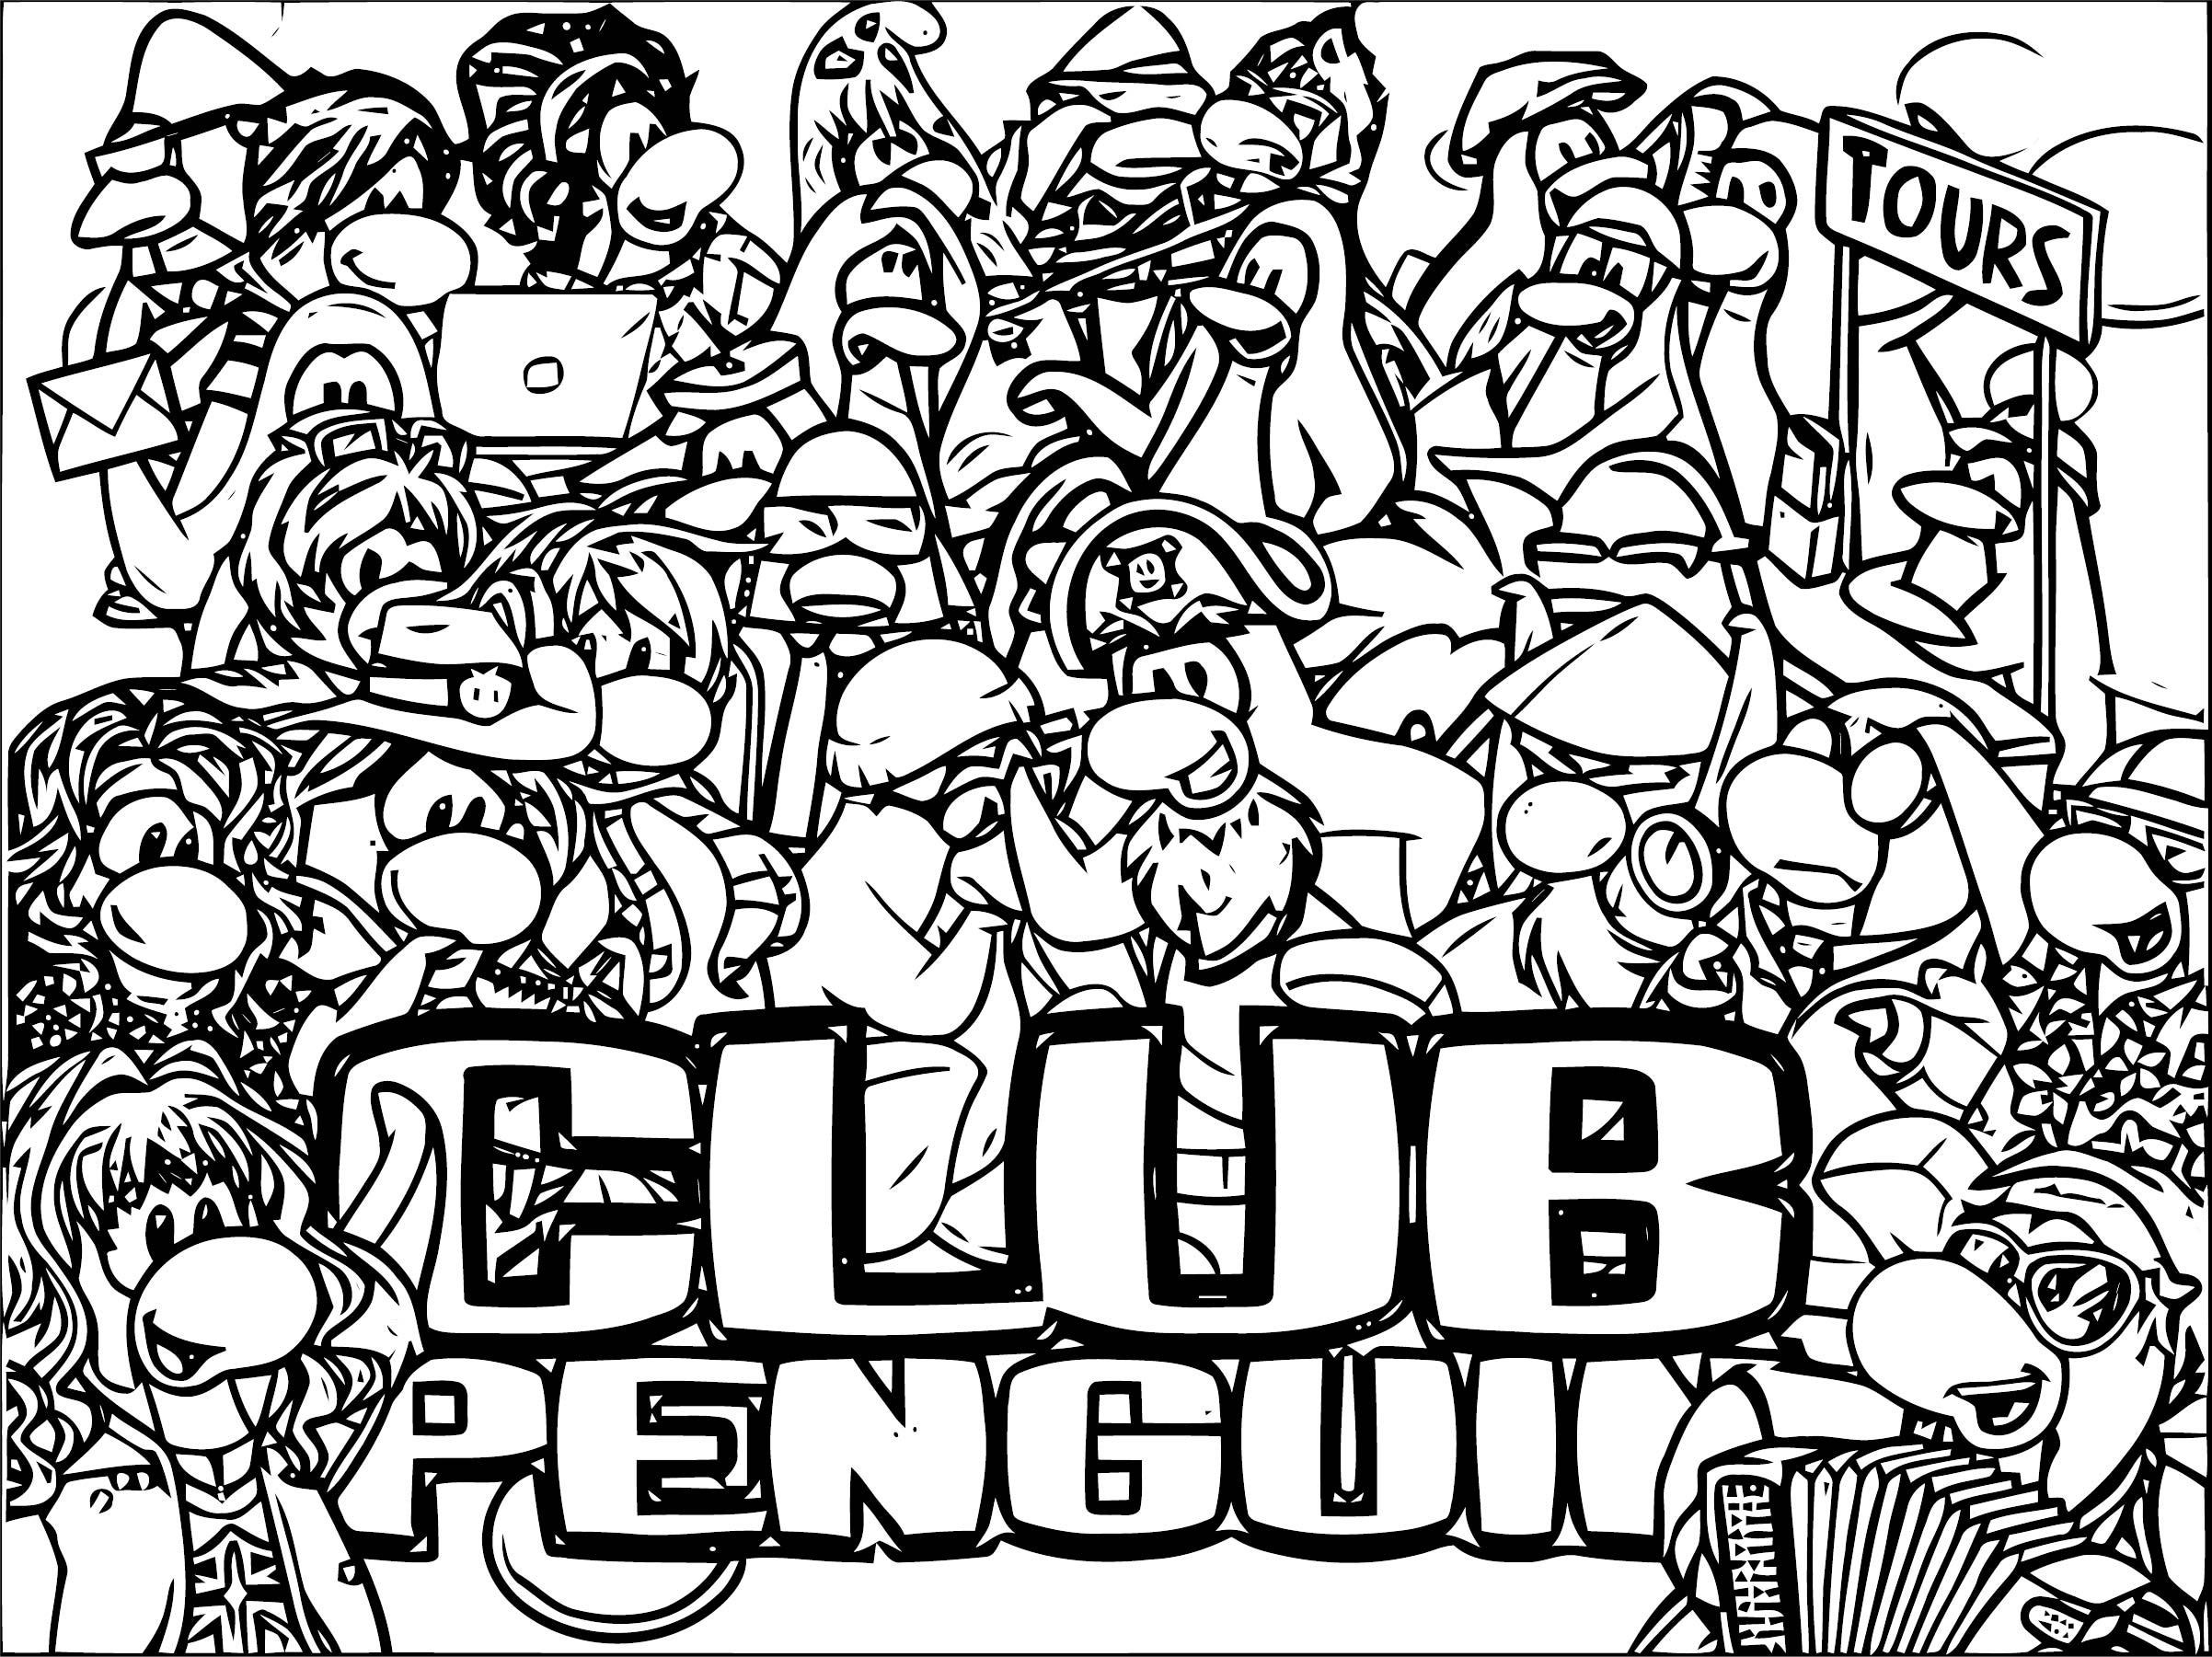 Club Penguin Logo - Club Penguin Logo Crowded Coloring Page | Wecoloringpage.com